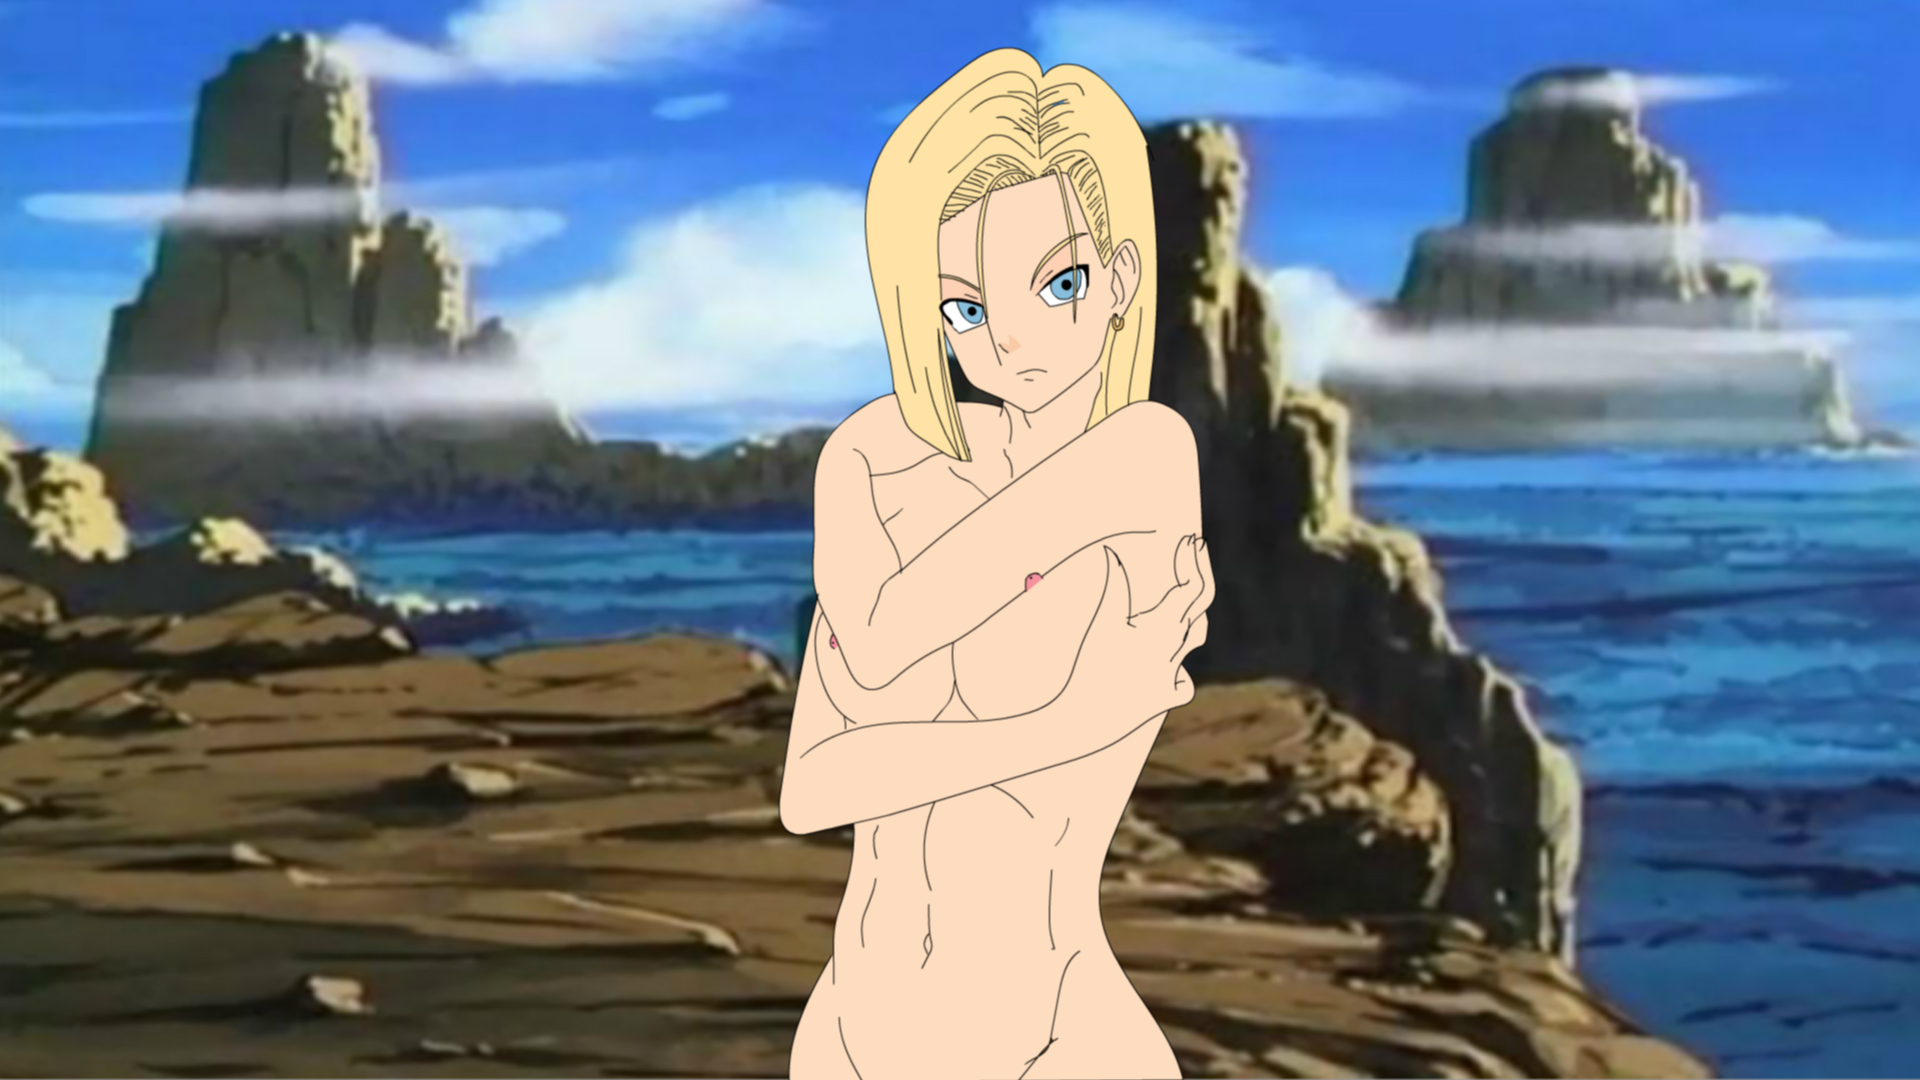 ang ryan recommends dbz android 18 nude pic